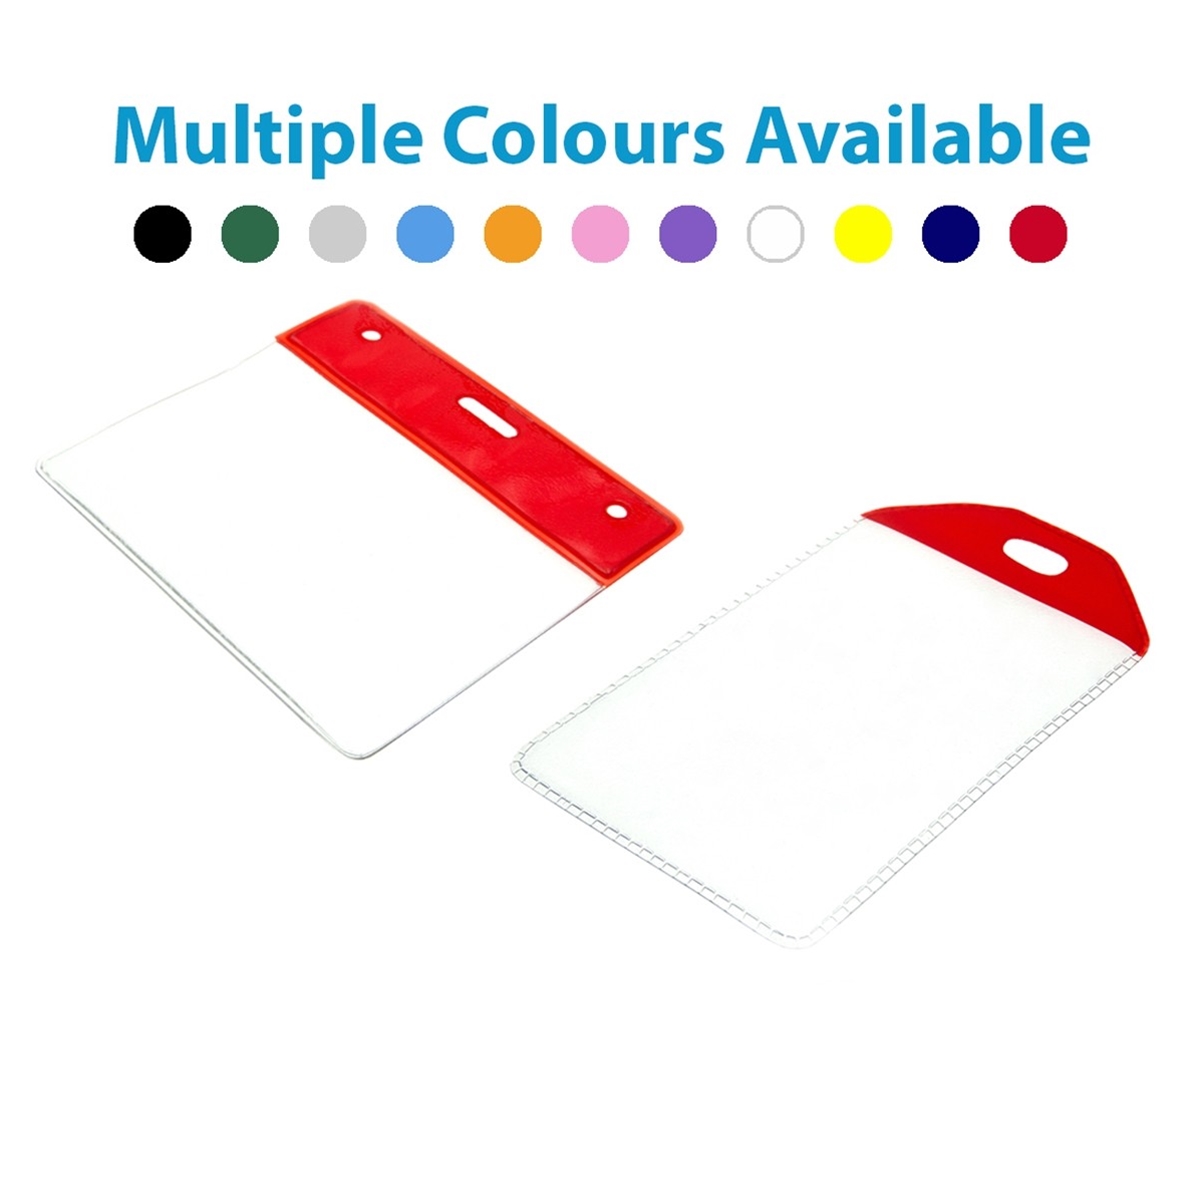 red top id card wallet in landscape and portrait showing multiple colours available